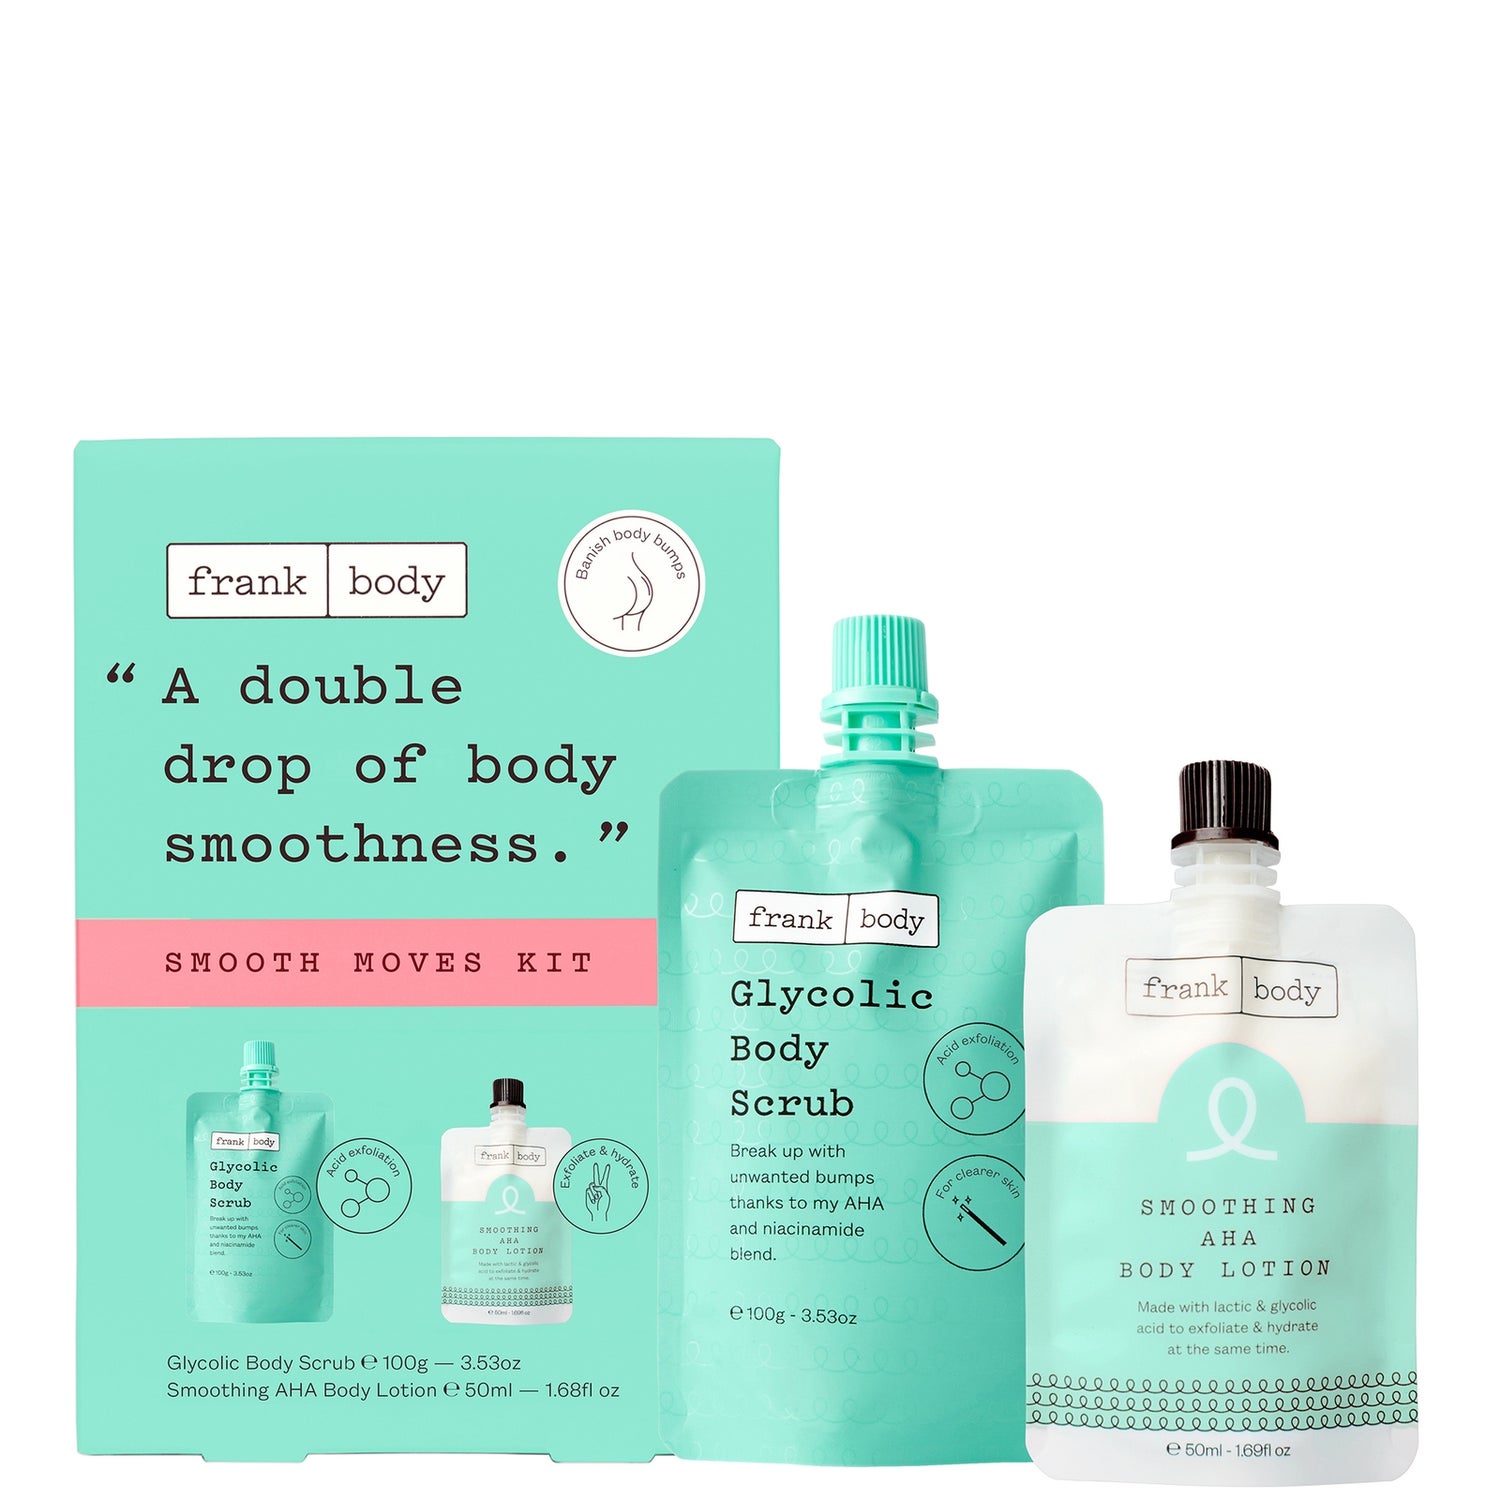 Frank Body Smooth Moves Kit